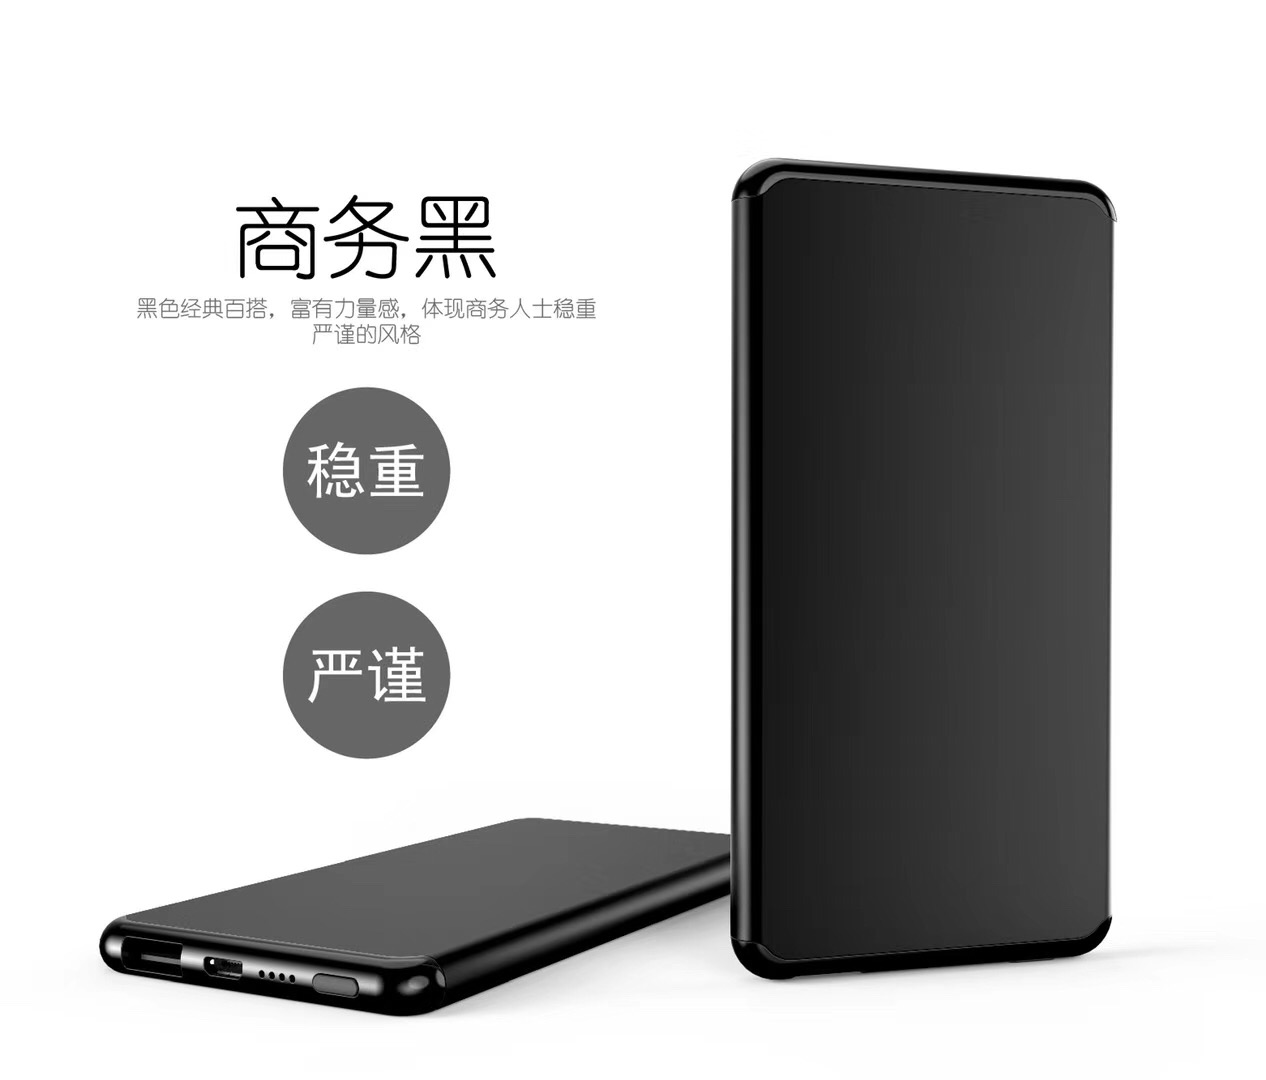 Single U ultra thin polymer compact mobile power charger aluminum alloy shell (suitable for gifts)